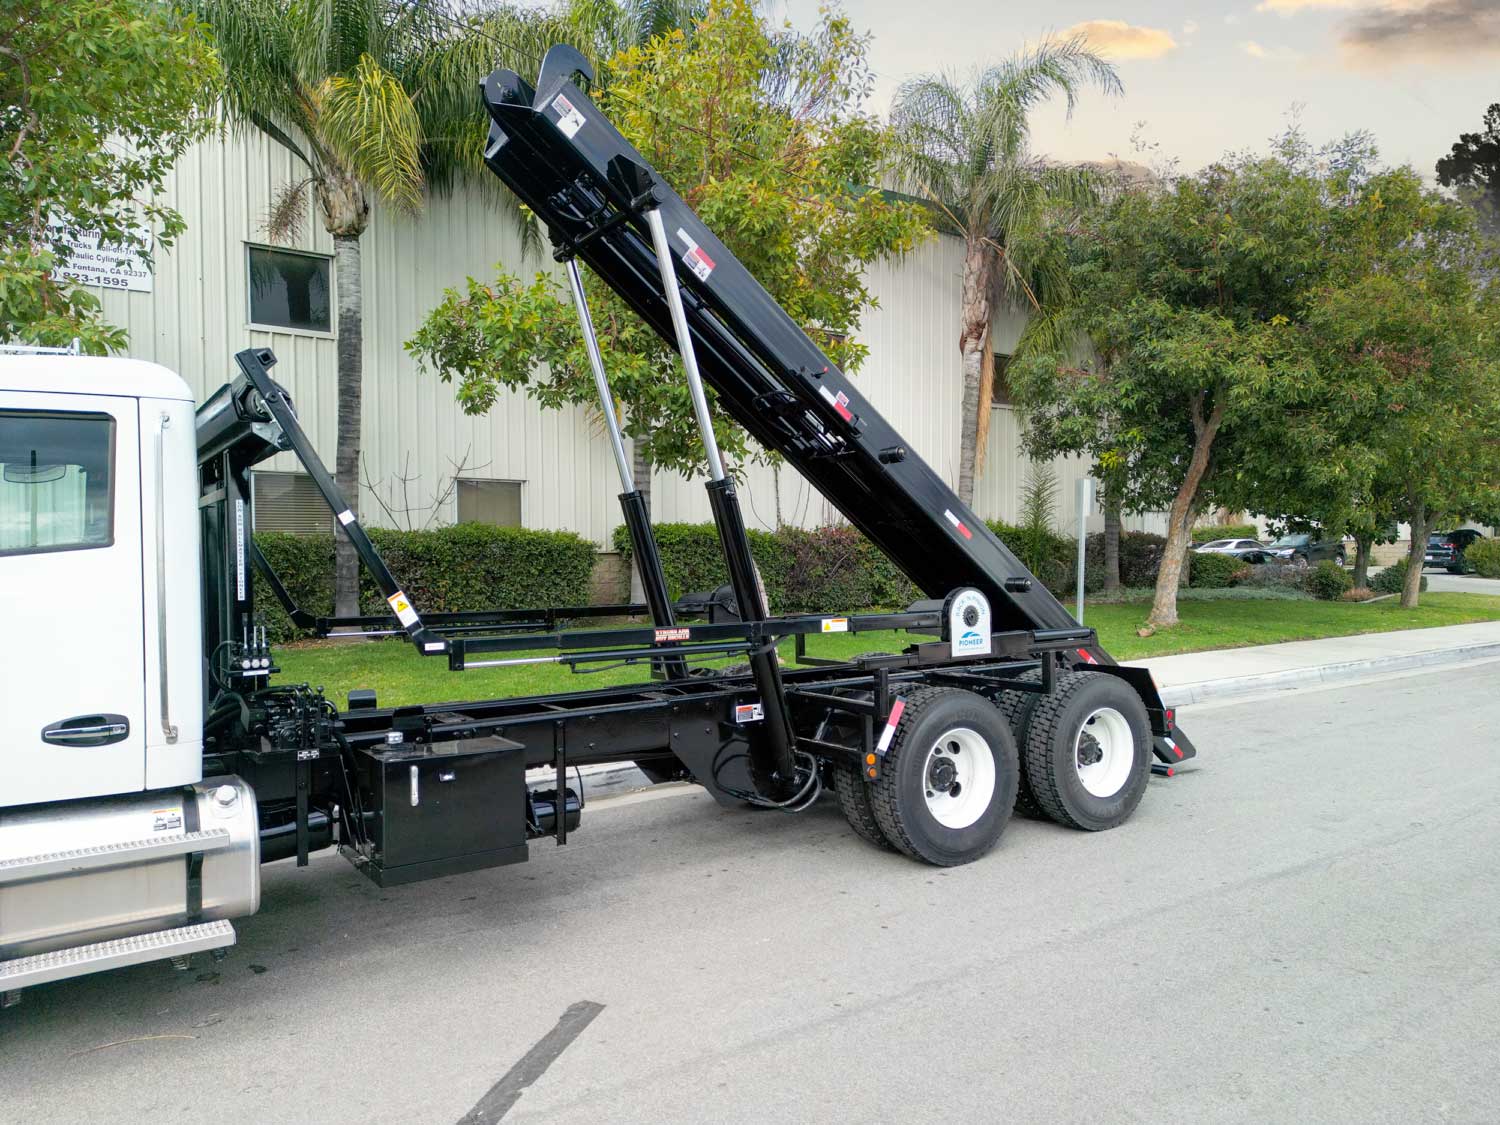 Maximizing Durability: Key Features of Top-Performing Roll-Off Truck Chassis